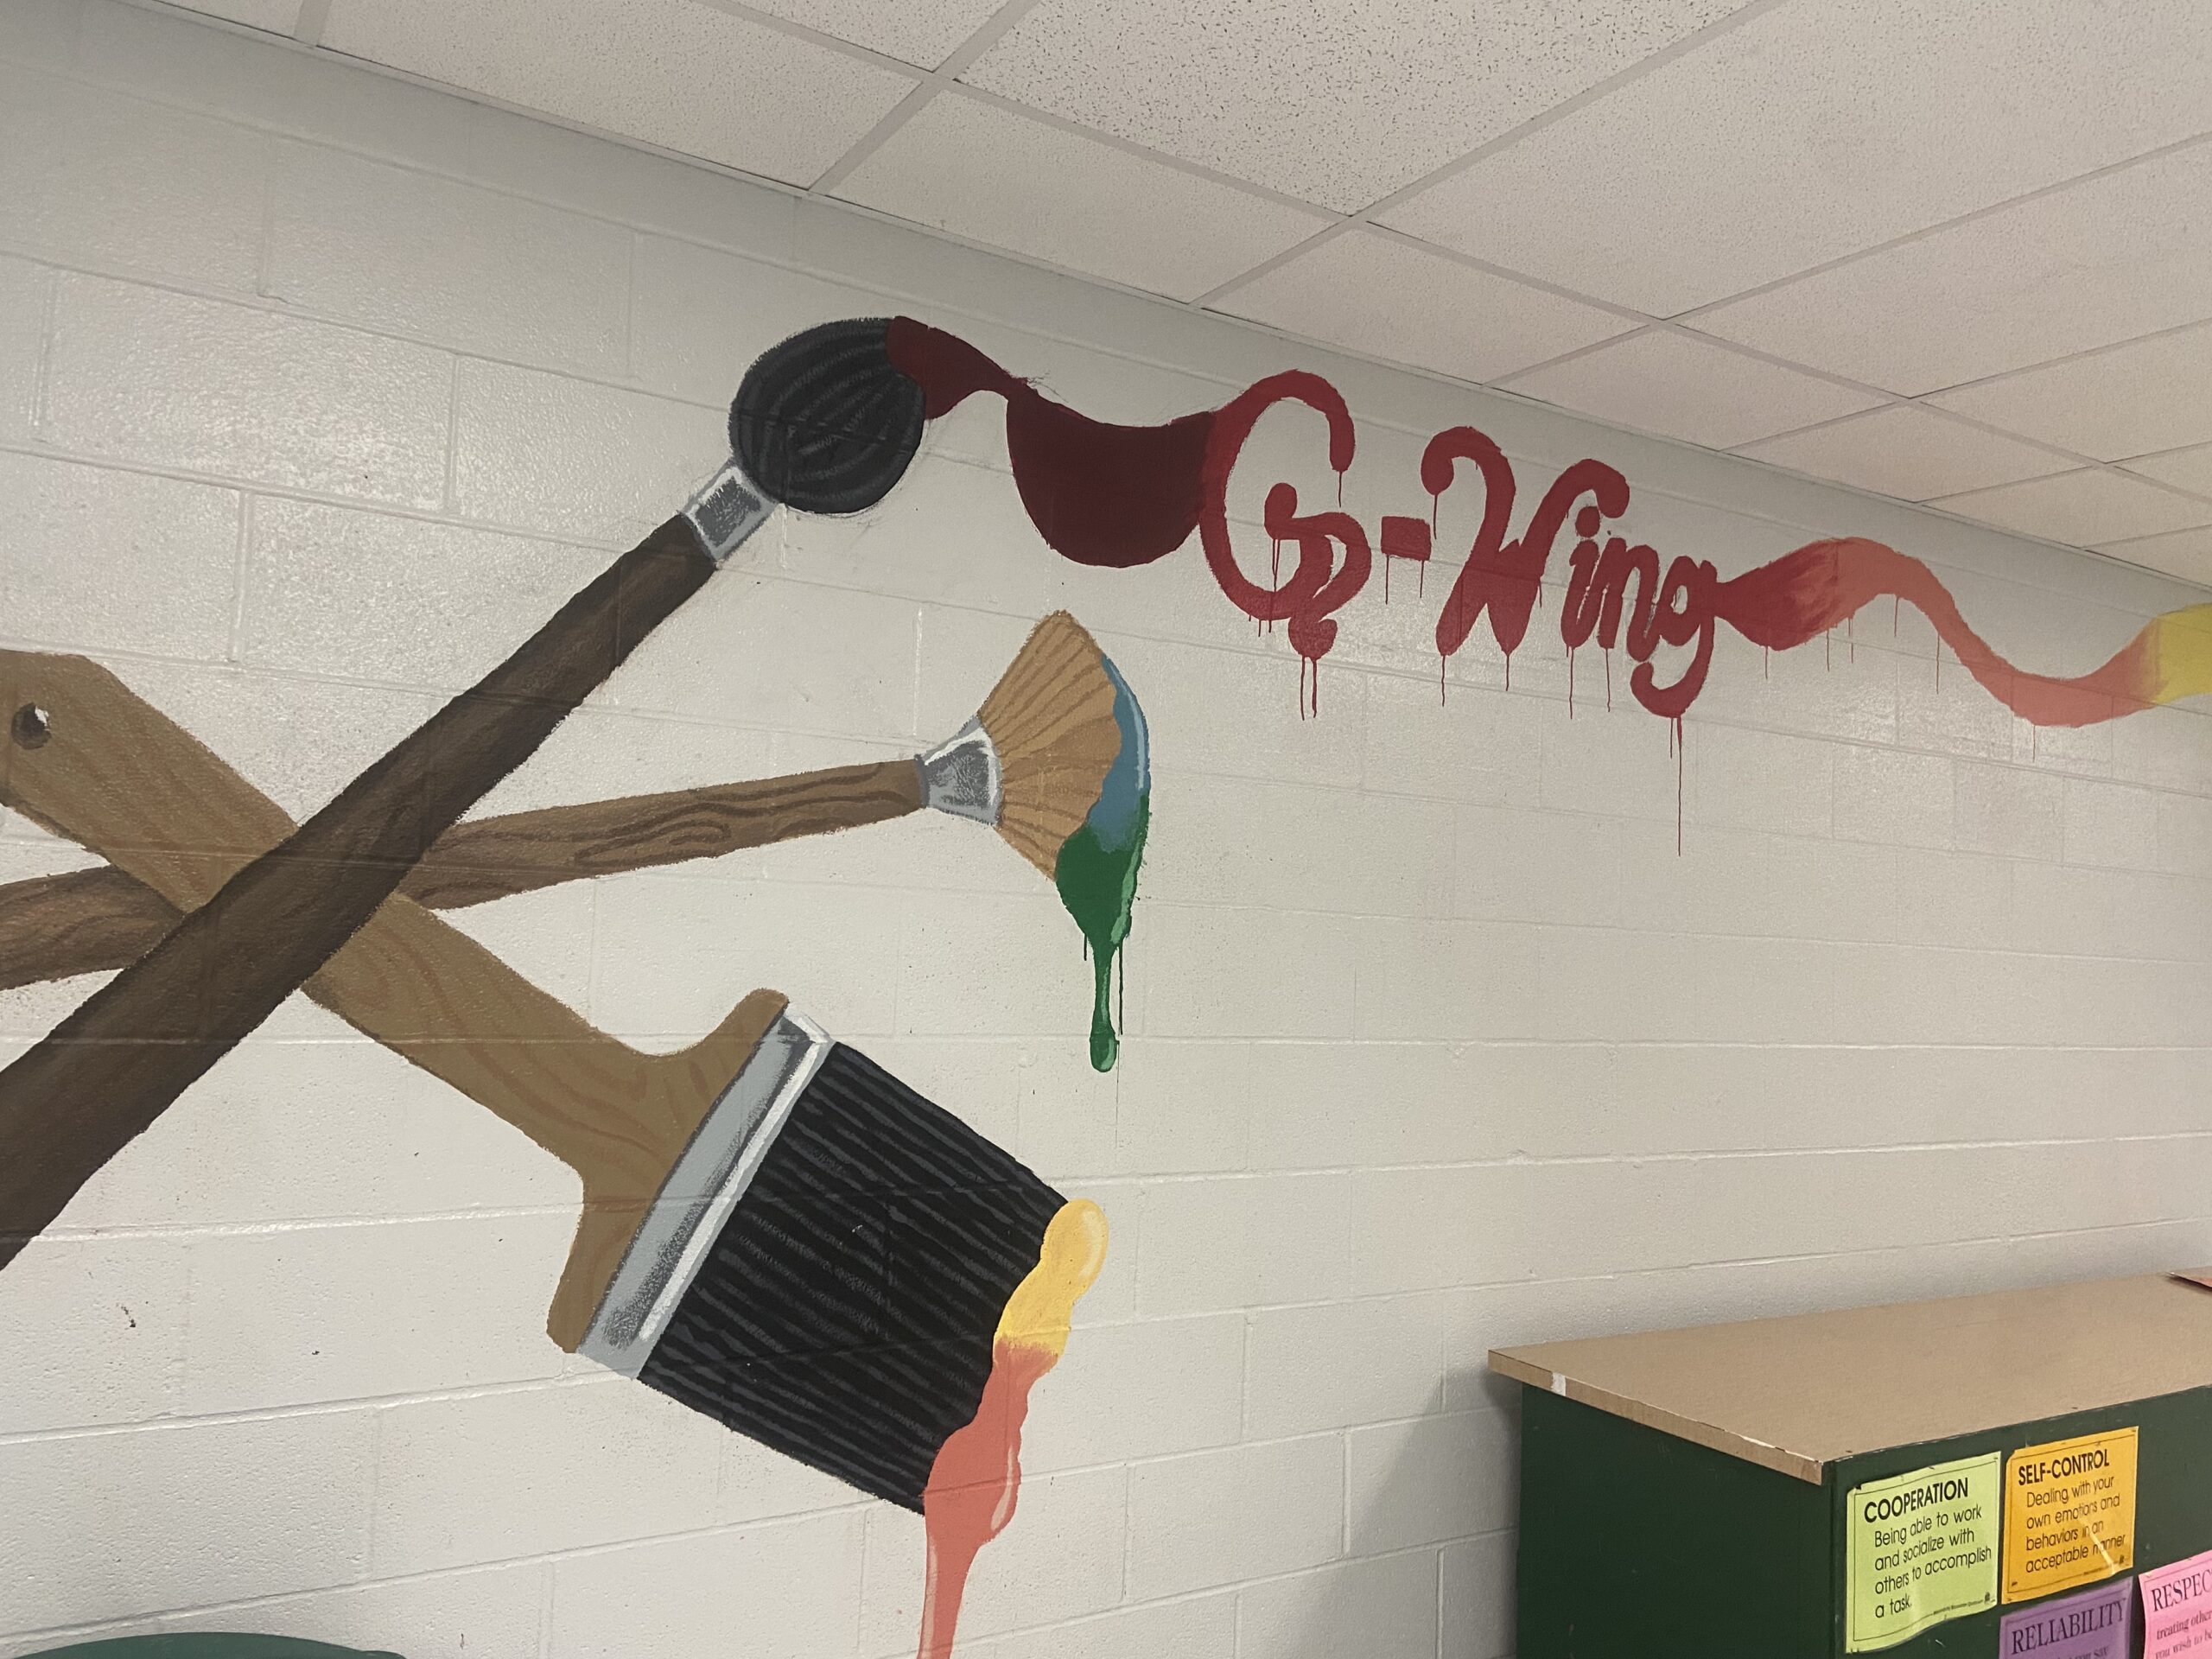 Student art portrayed in schools helps students get recognized by their peers and other administration. This recognition encourages students to express themselves freely in school.